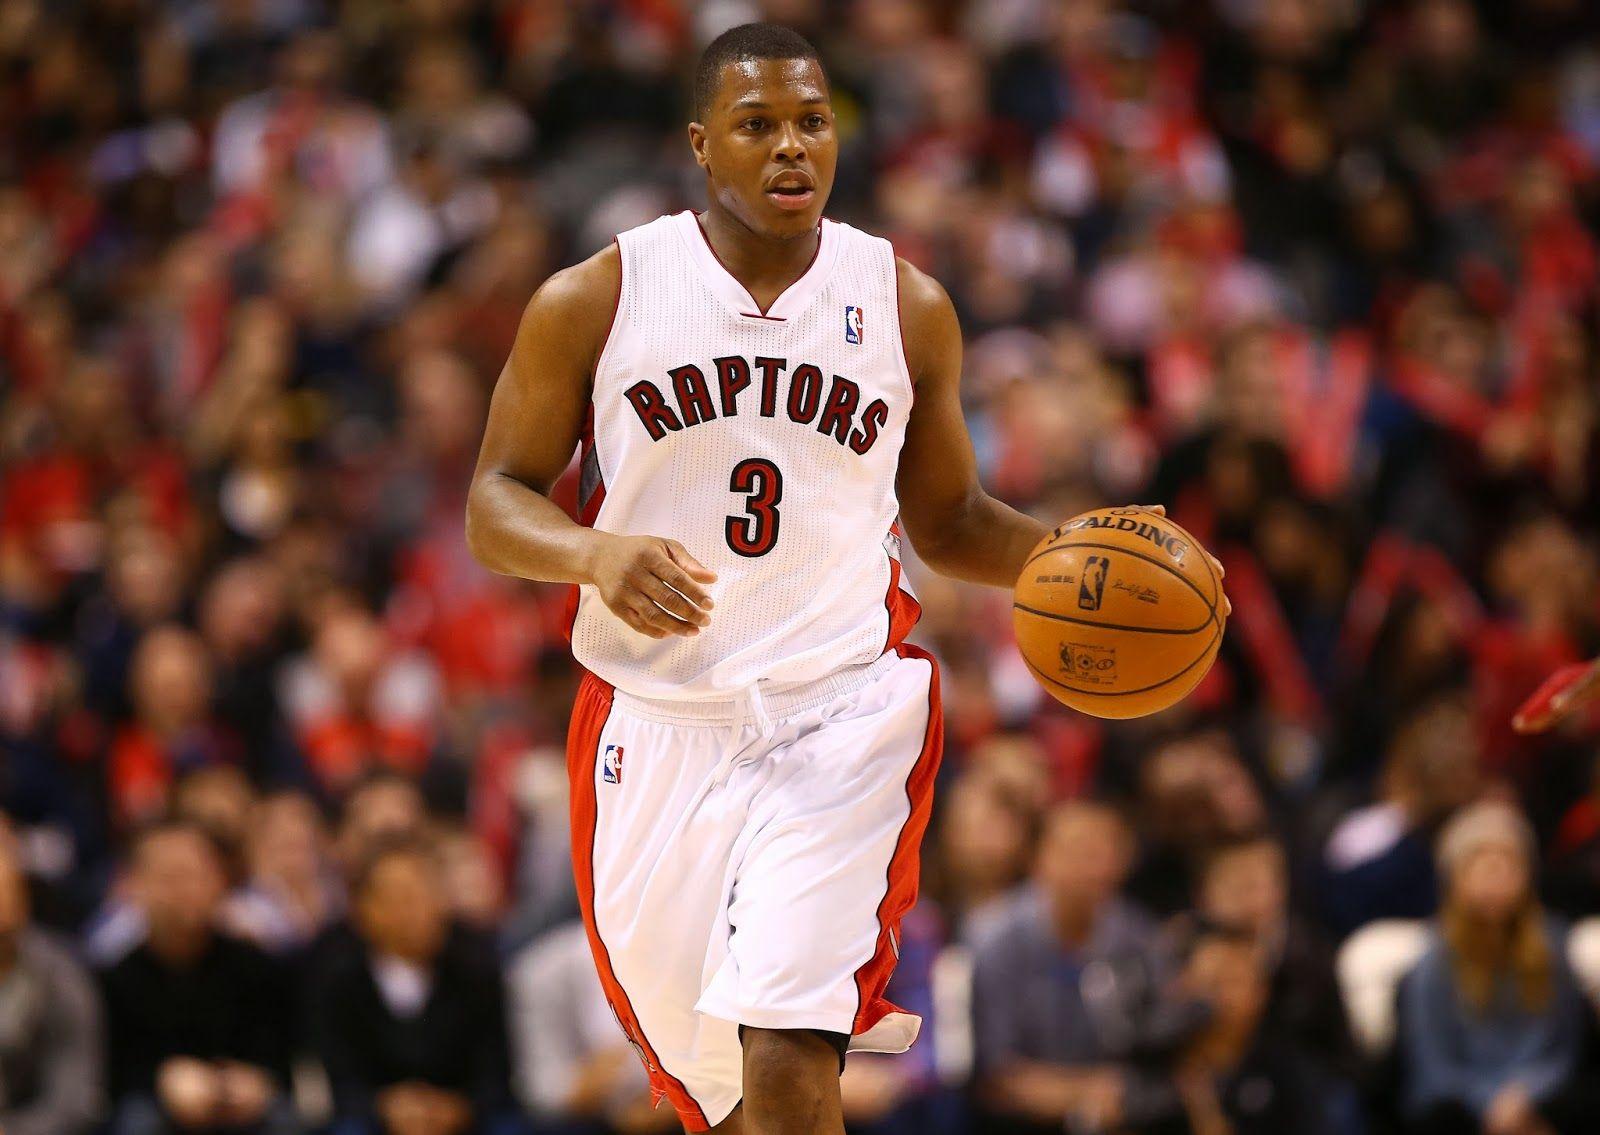 Kyle Lowry Best Player of the Year Picture and Wallpaper